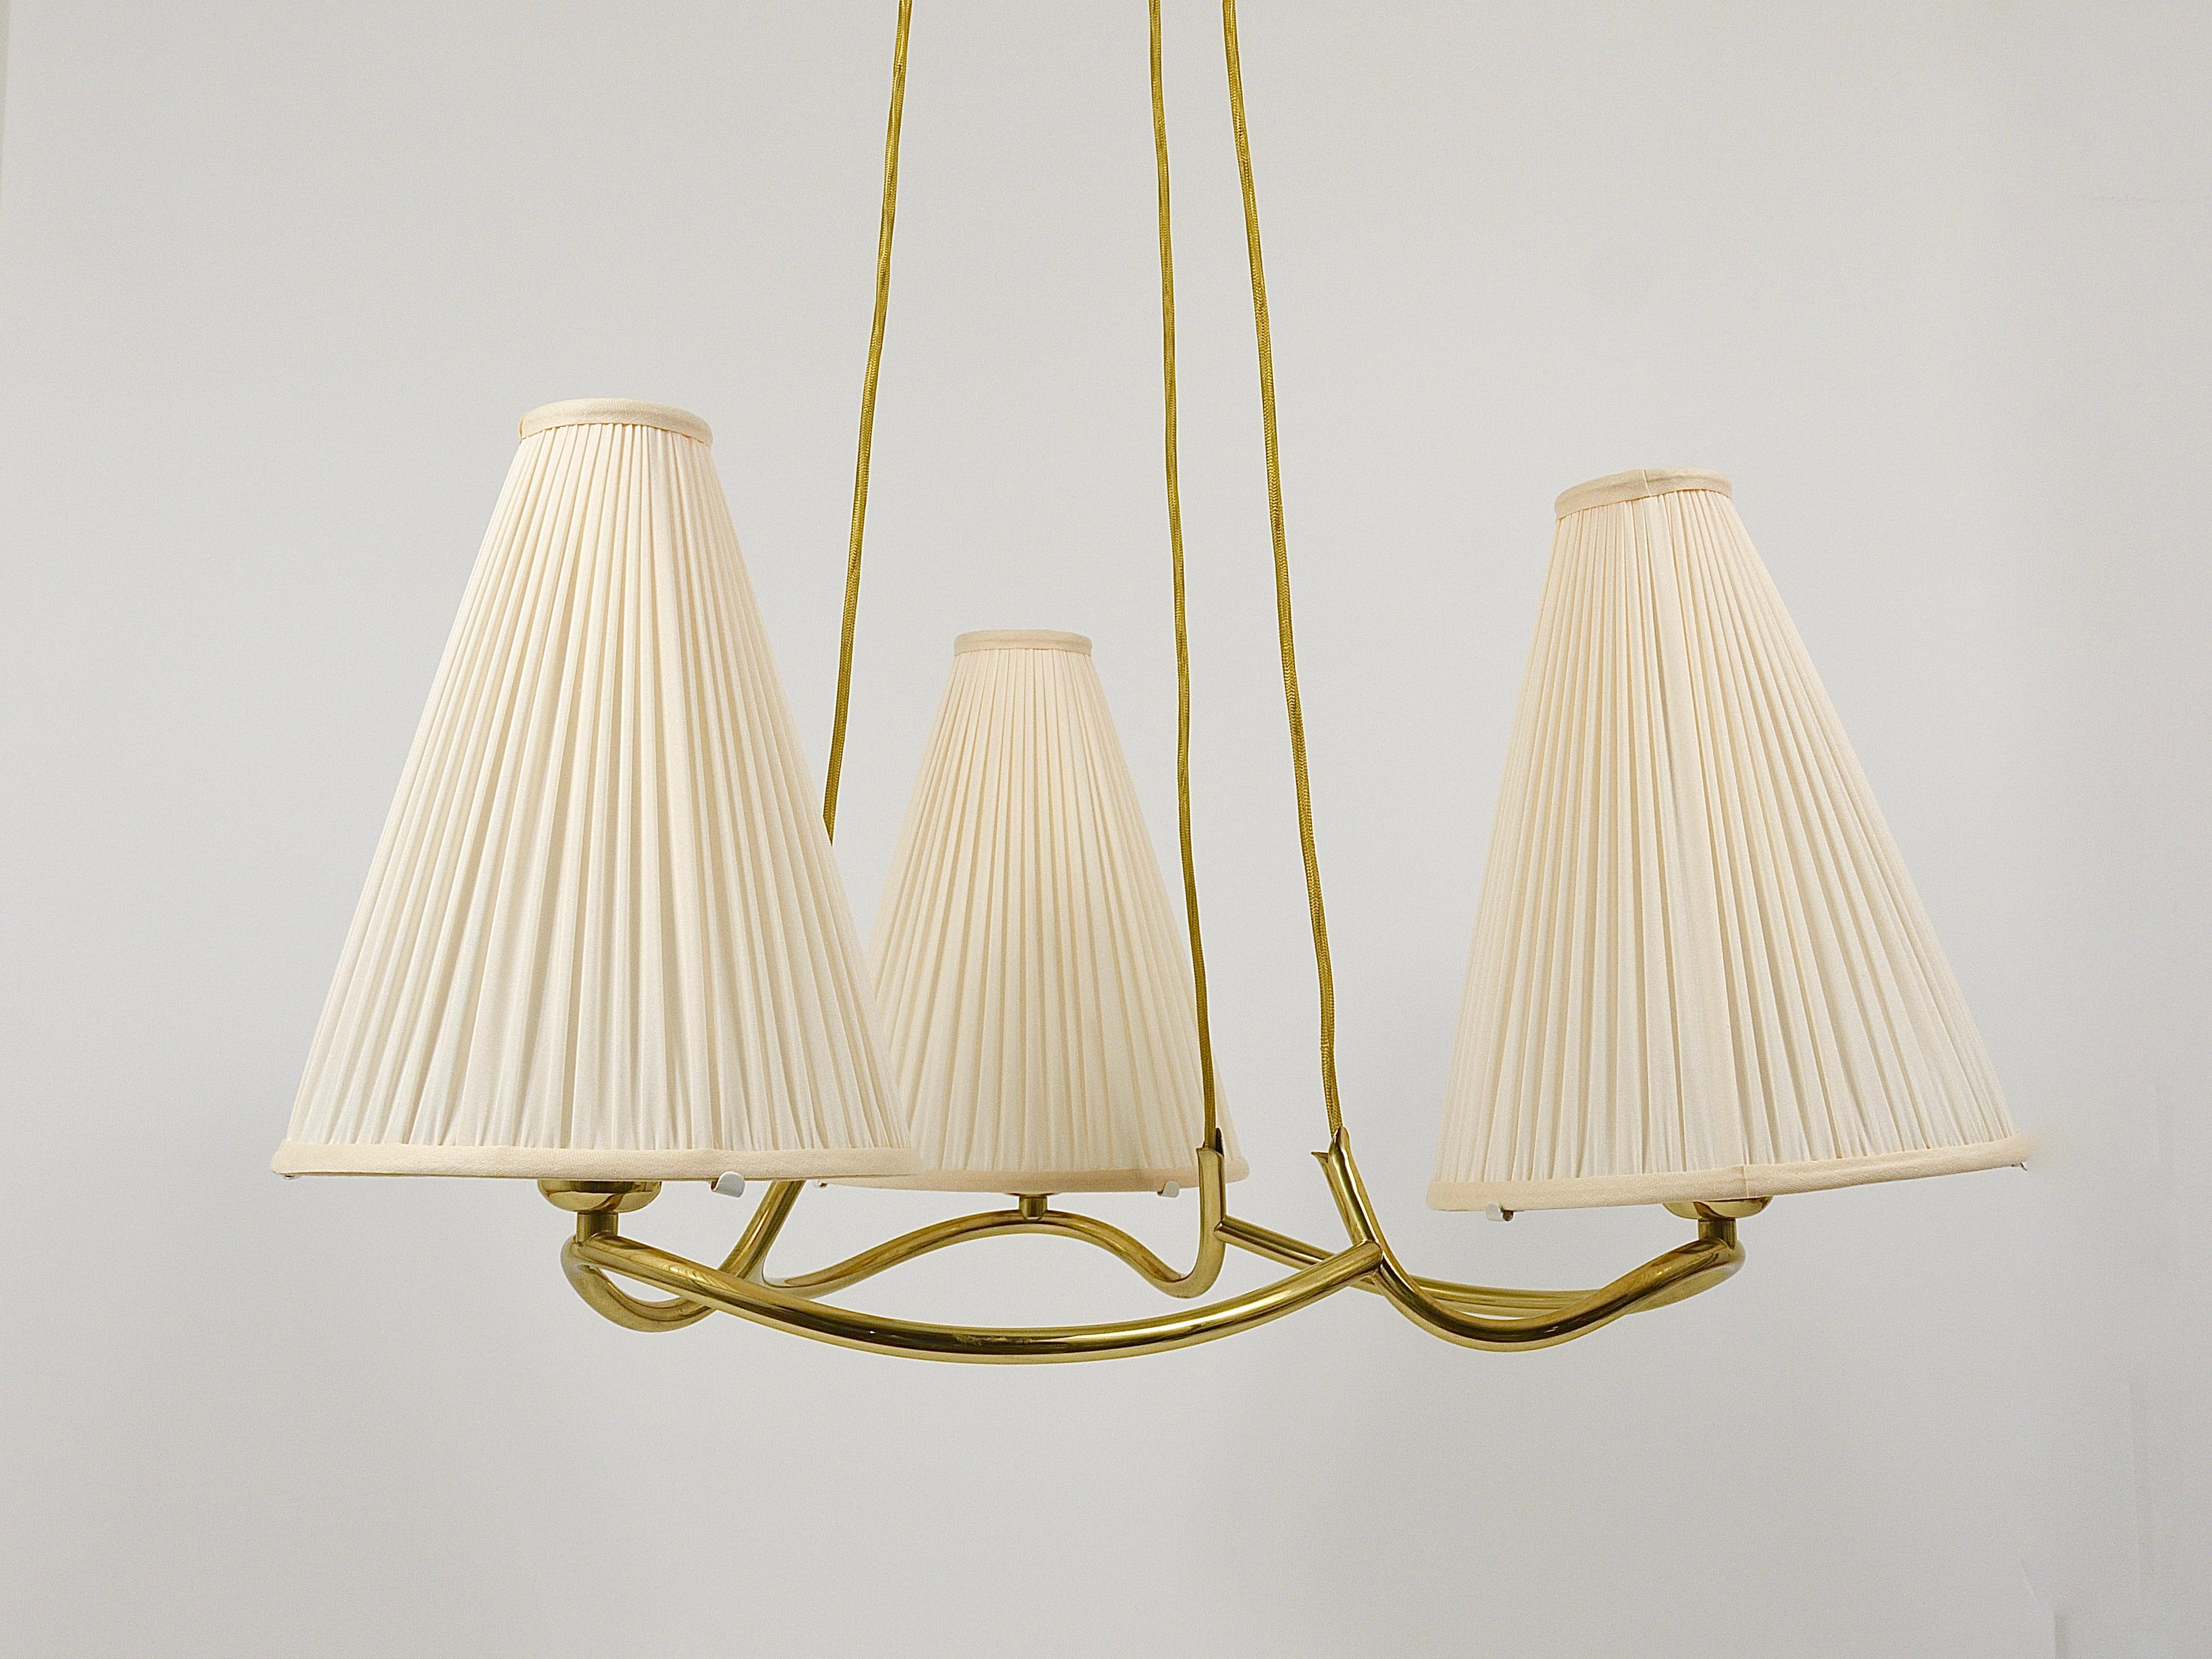 A beautiful and elegant brass chandelier, model „Heron“, manufactured by J.T. Kalmar Vienna in the early 1950s. This sculptural chandelier has a wonderfully curved brass frame, it offers three light sources with conical lampshades and hangs on